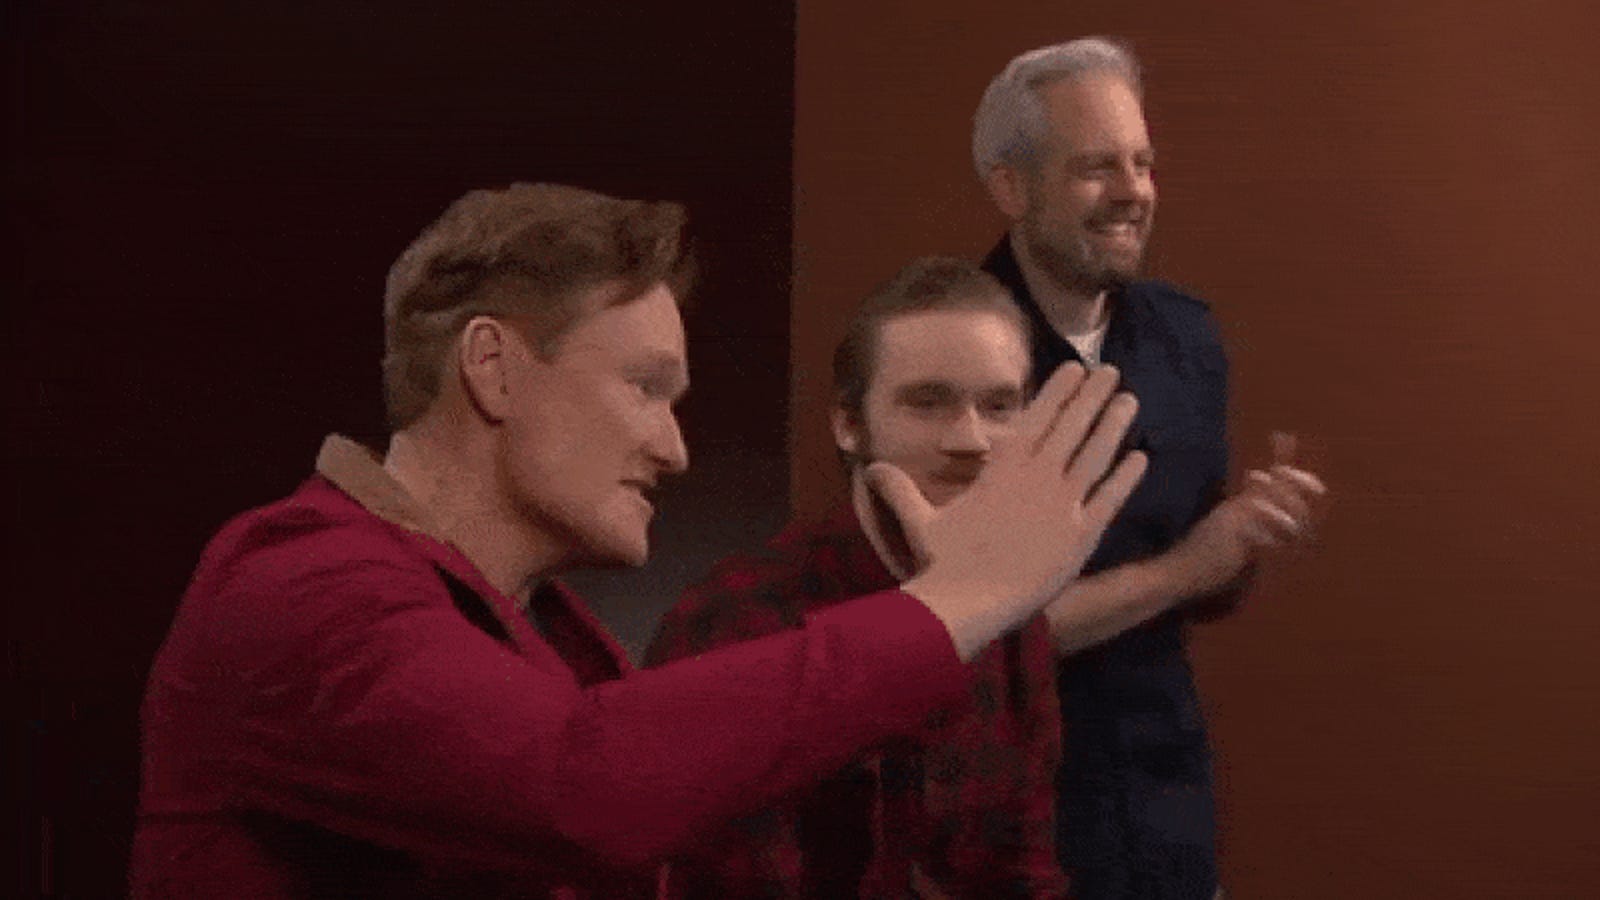 Conan Gaming with Pewdiepie Was Kind of Awkward